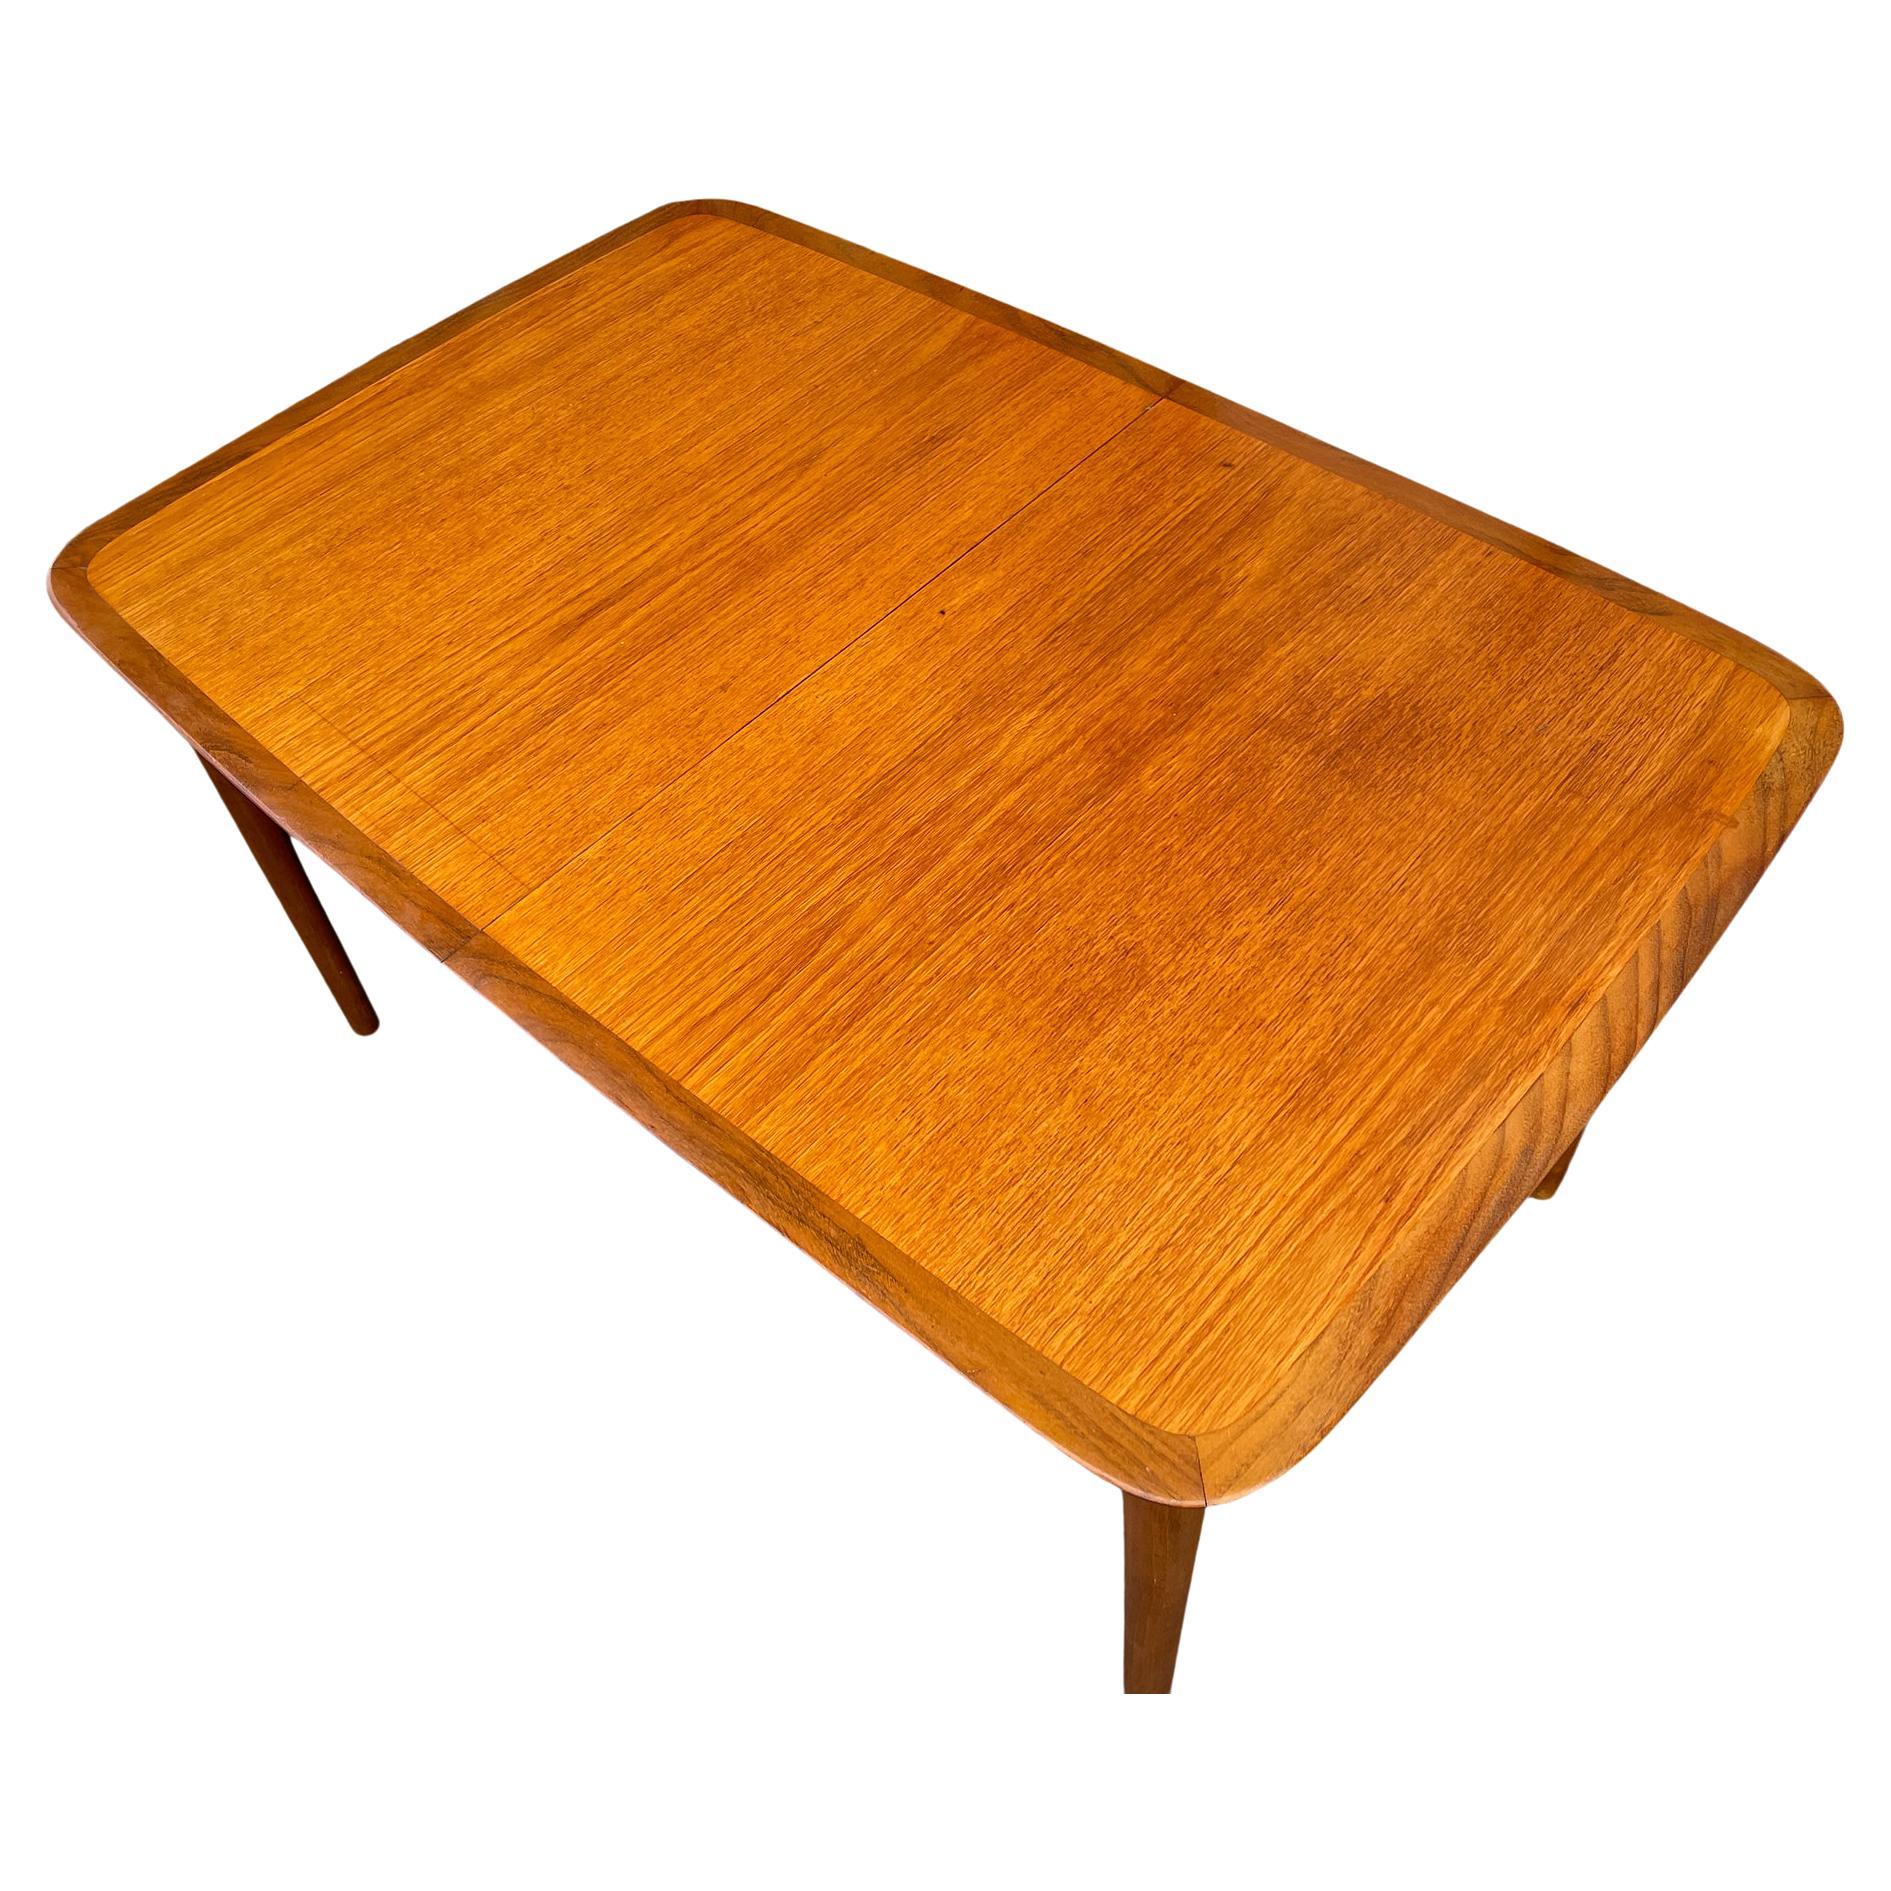 Mid-Century Modern German teak dining table with 4 leaves by LÜBKE. Very high quality Dining table with 4 Leaves that store underneath table. Beautiful Dining table design with rosewood edge details. 

Table measures 53.5